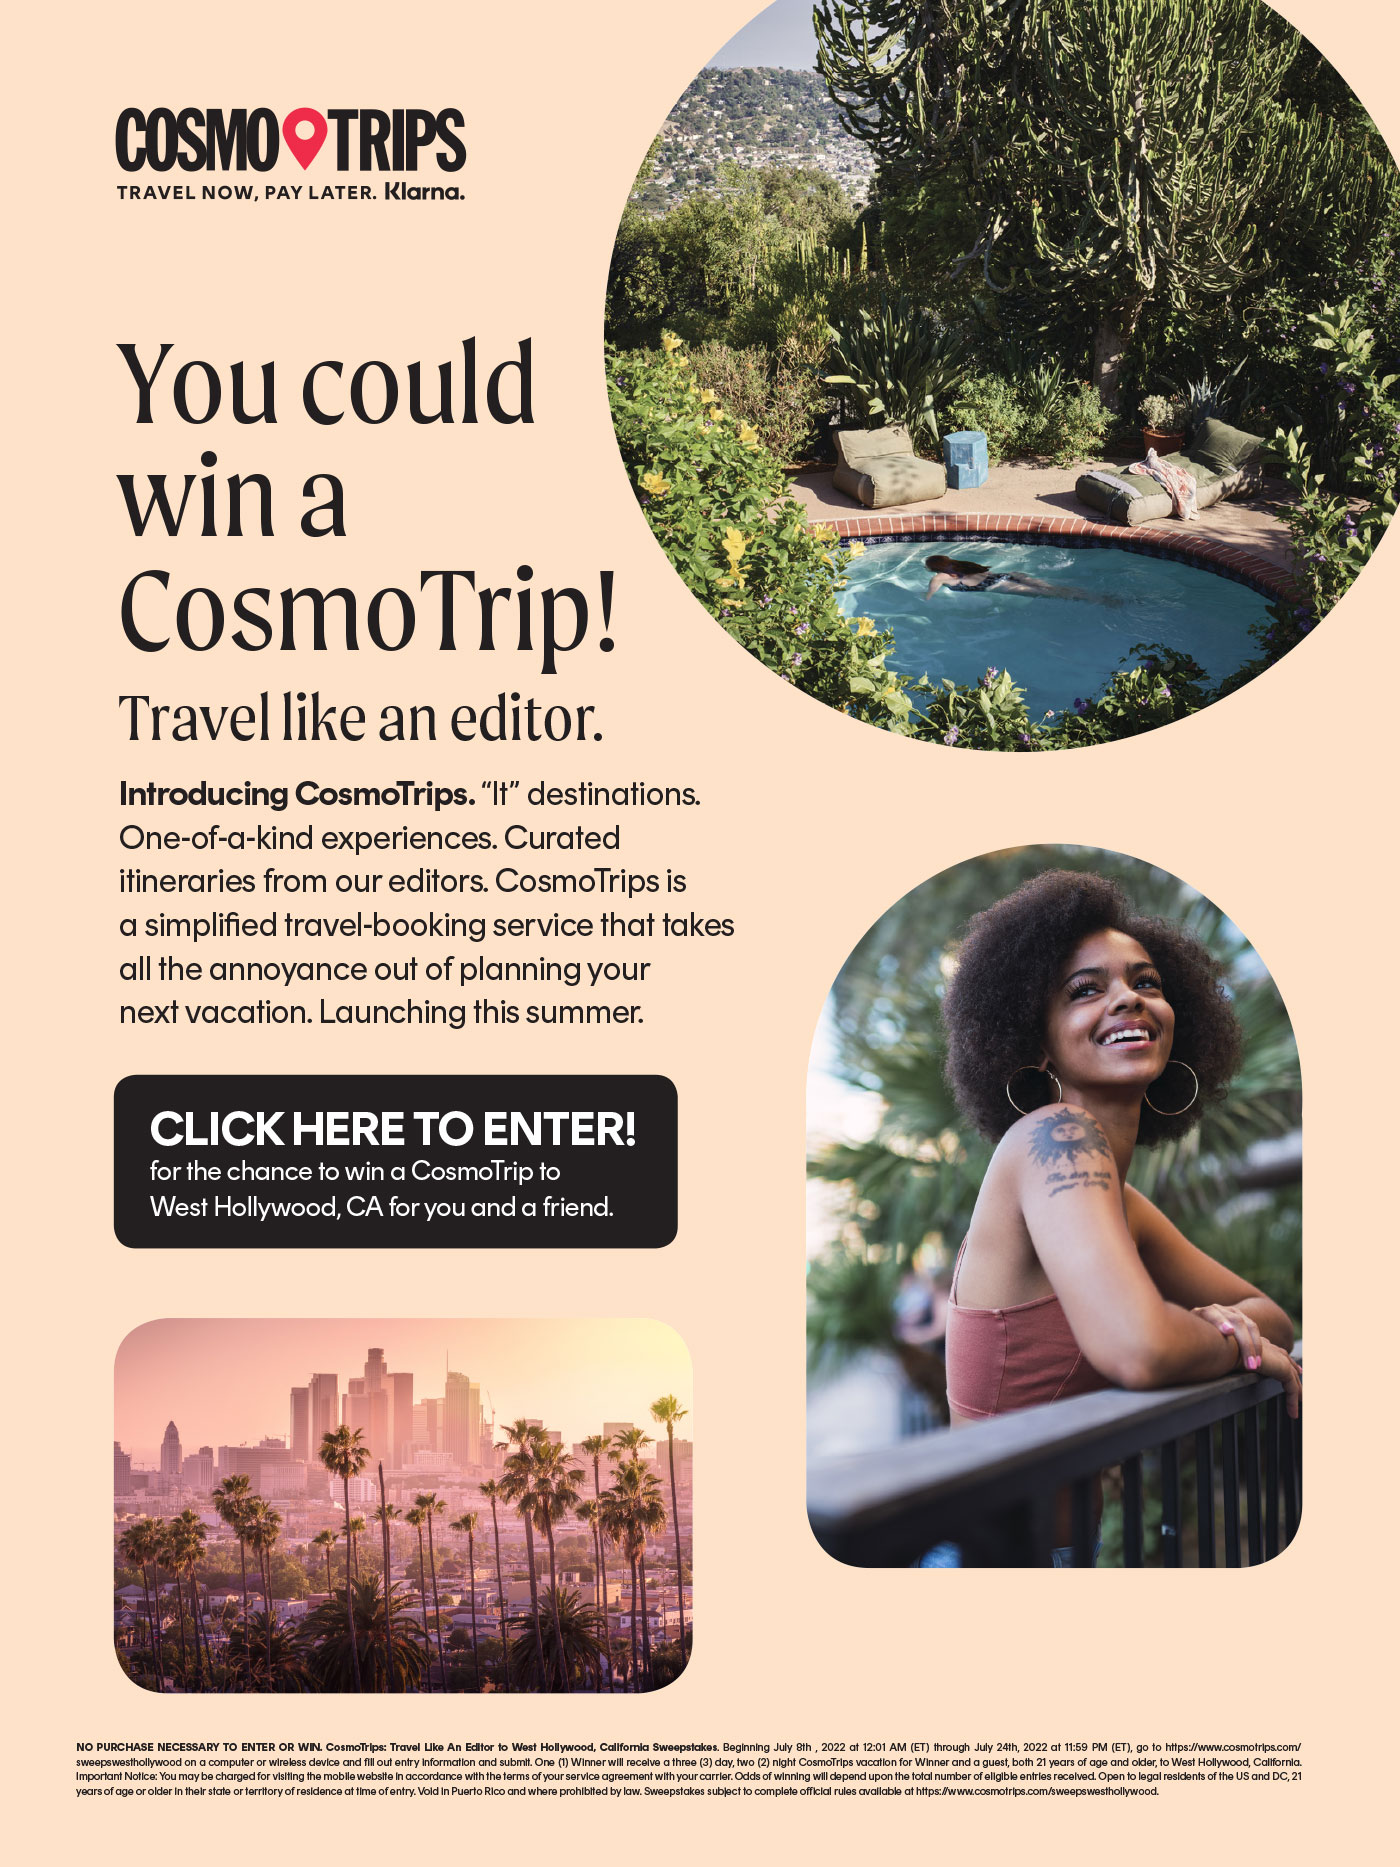 You could win a CosmoTrip!